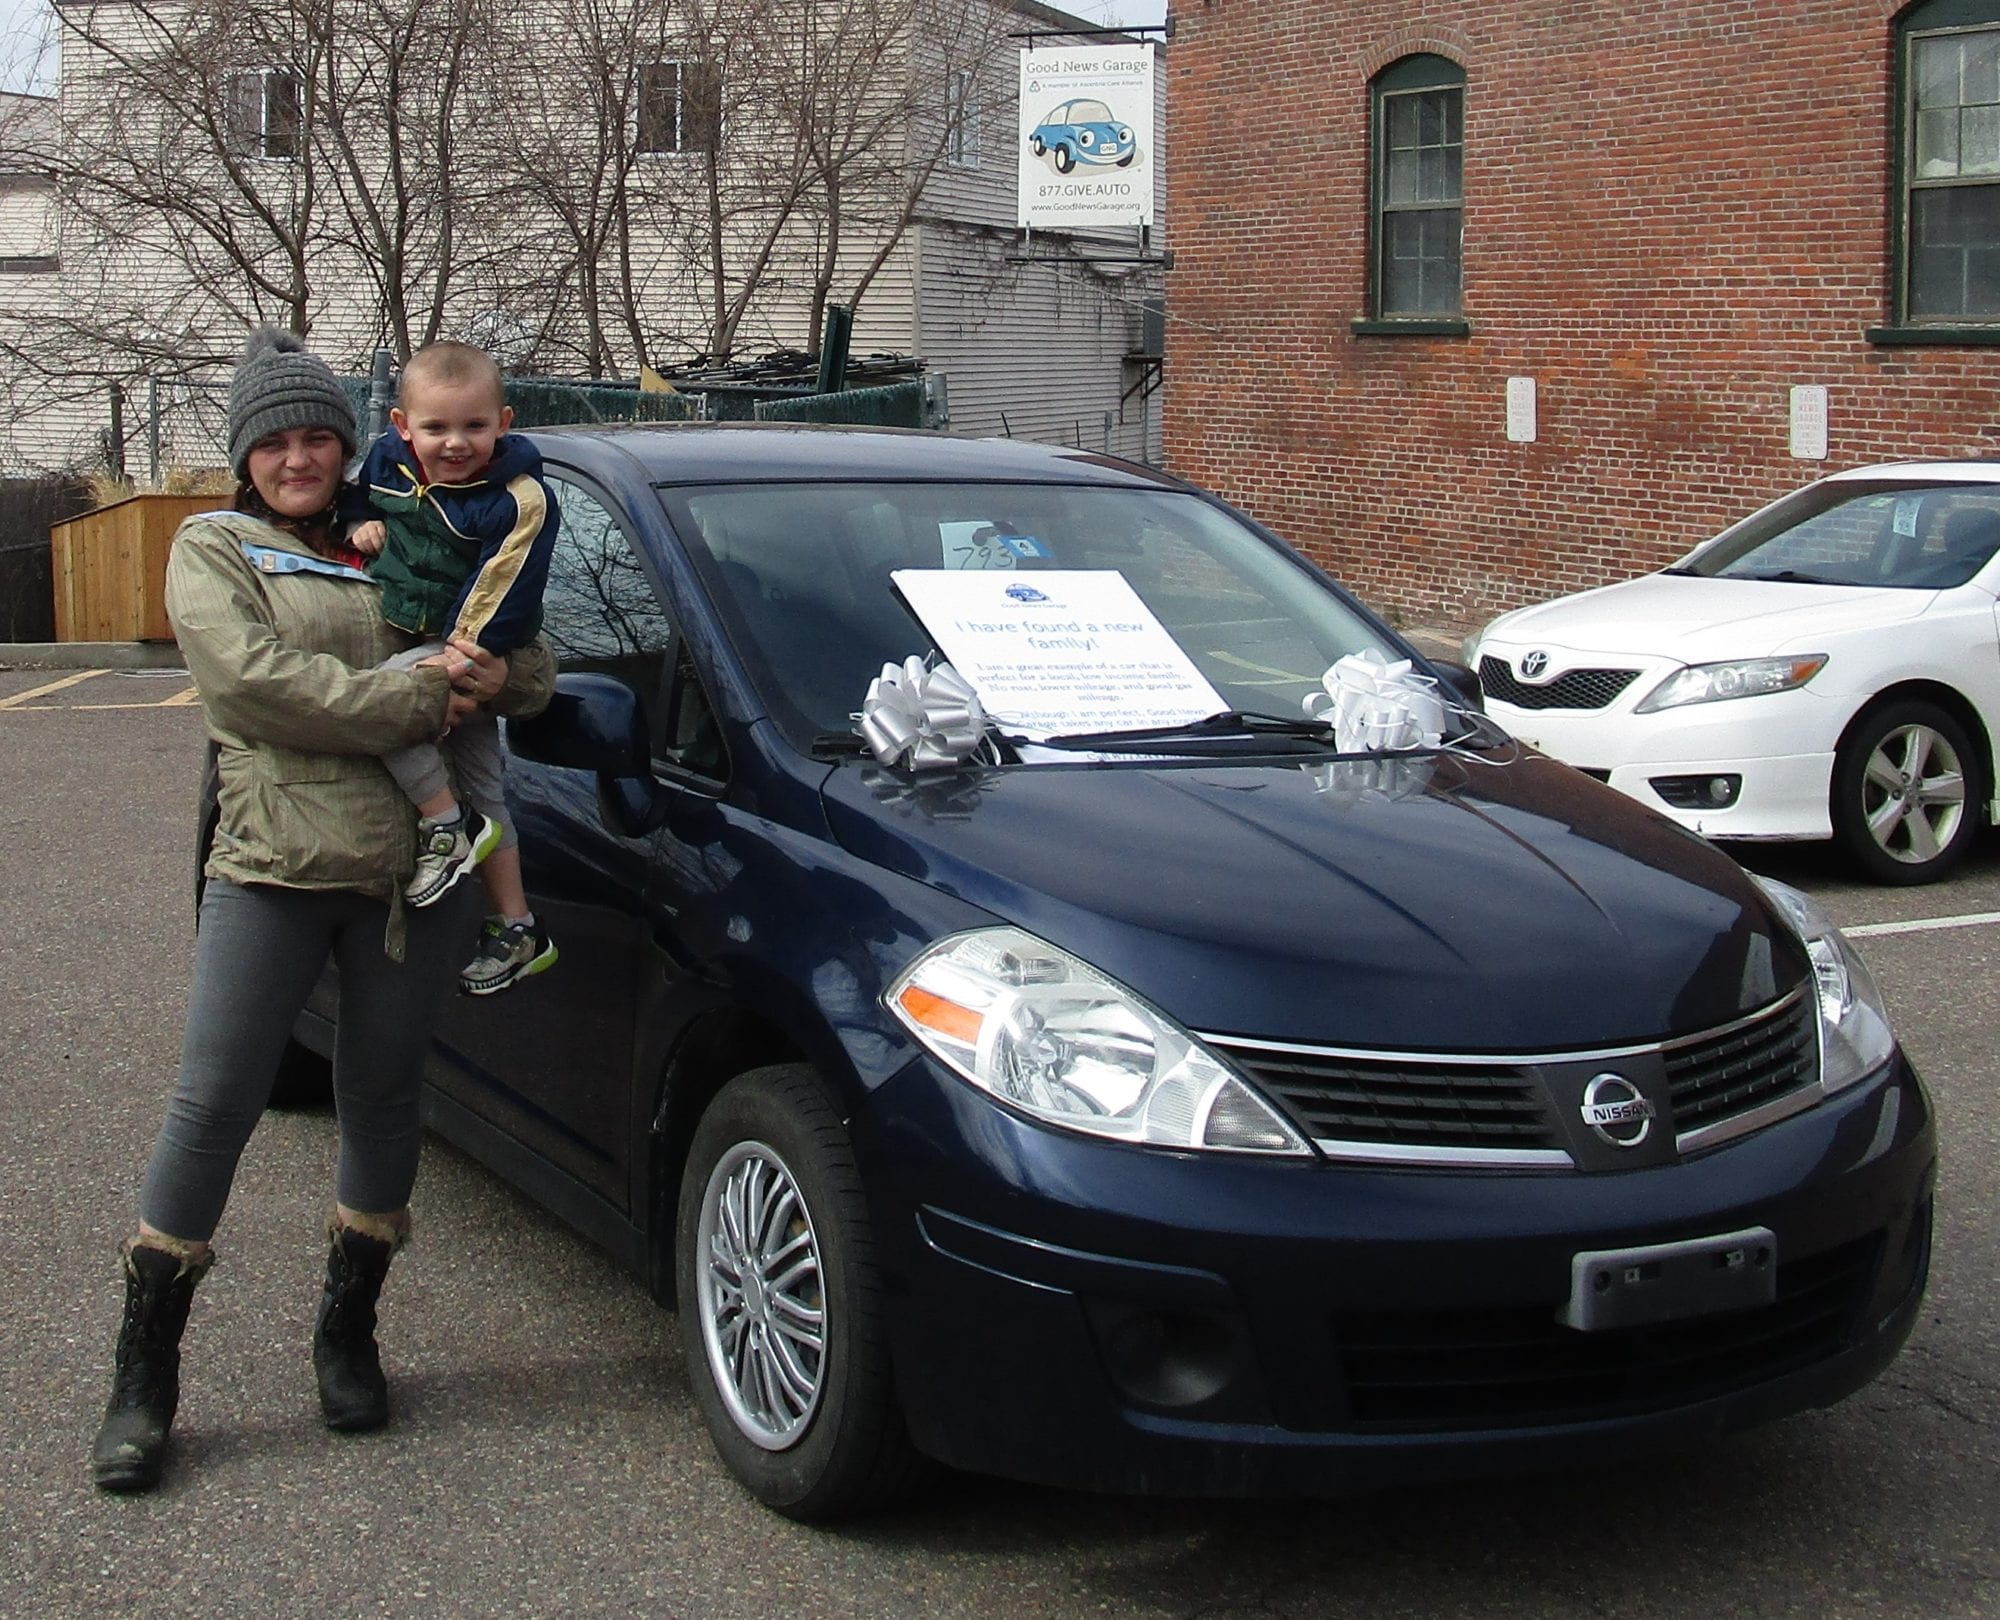 Megan and her son stand in front of the donated car they received from Good News Garage